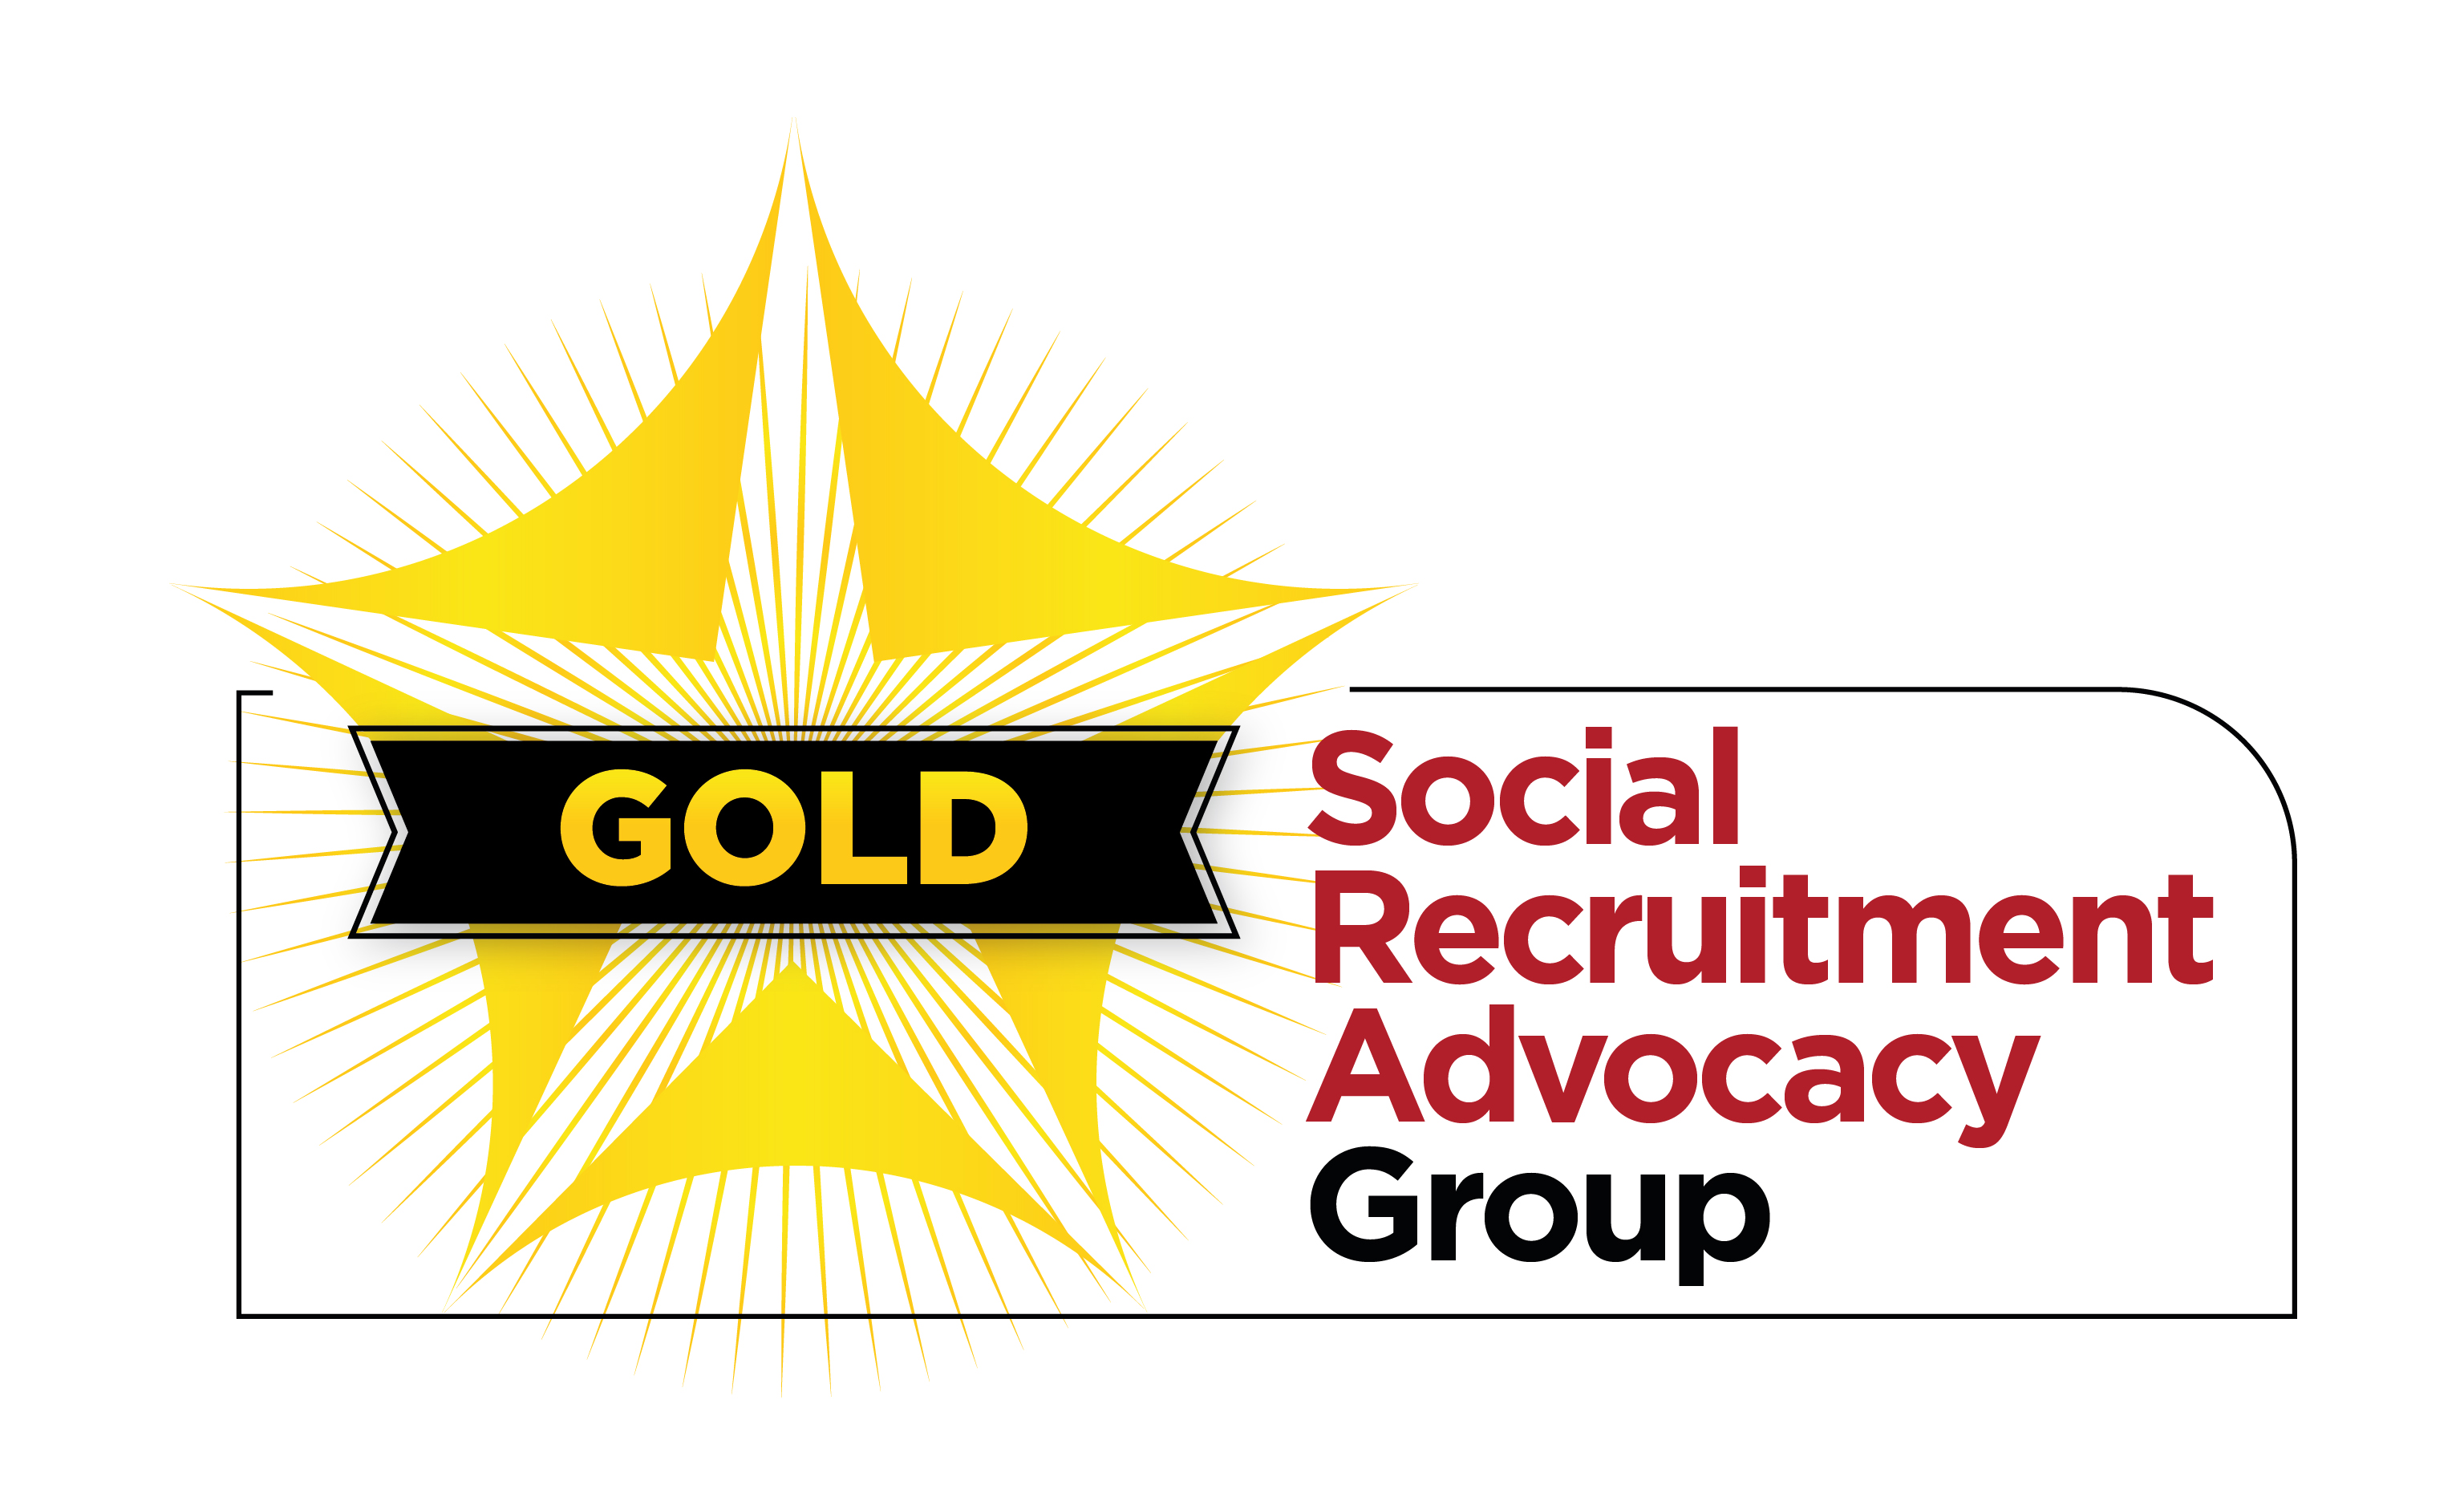  Milestone Infrastructure achieves Social Recruitment Advocacy Group Charter Mark Gold Status